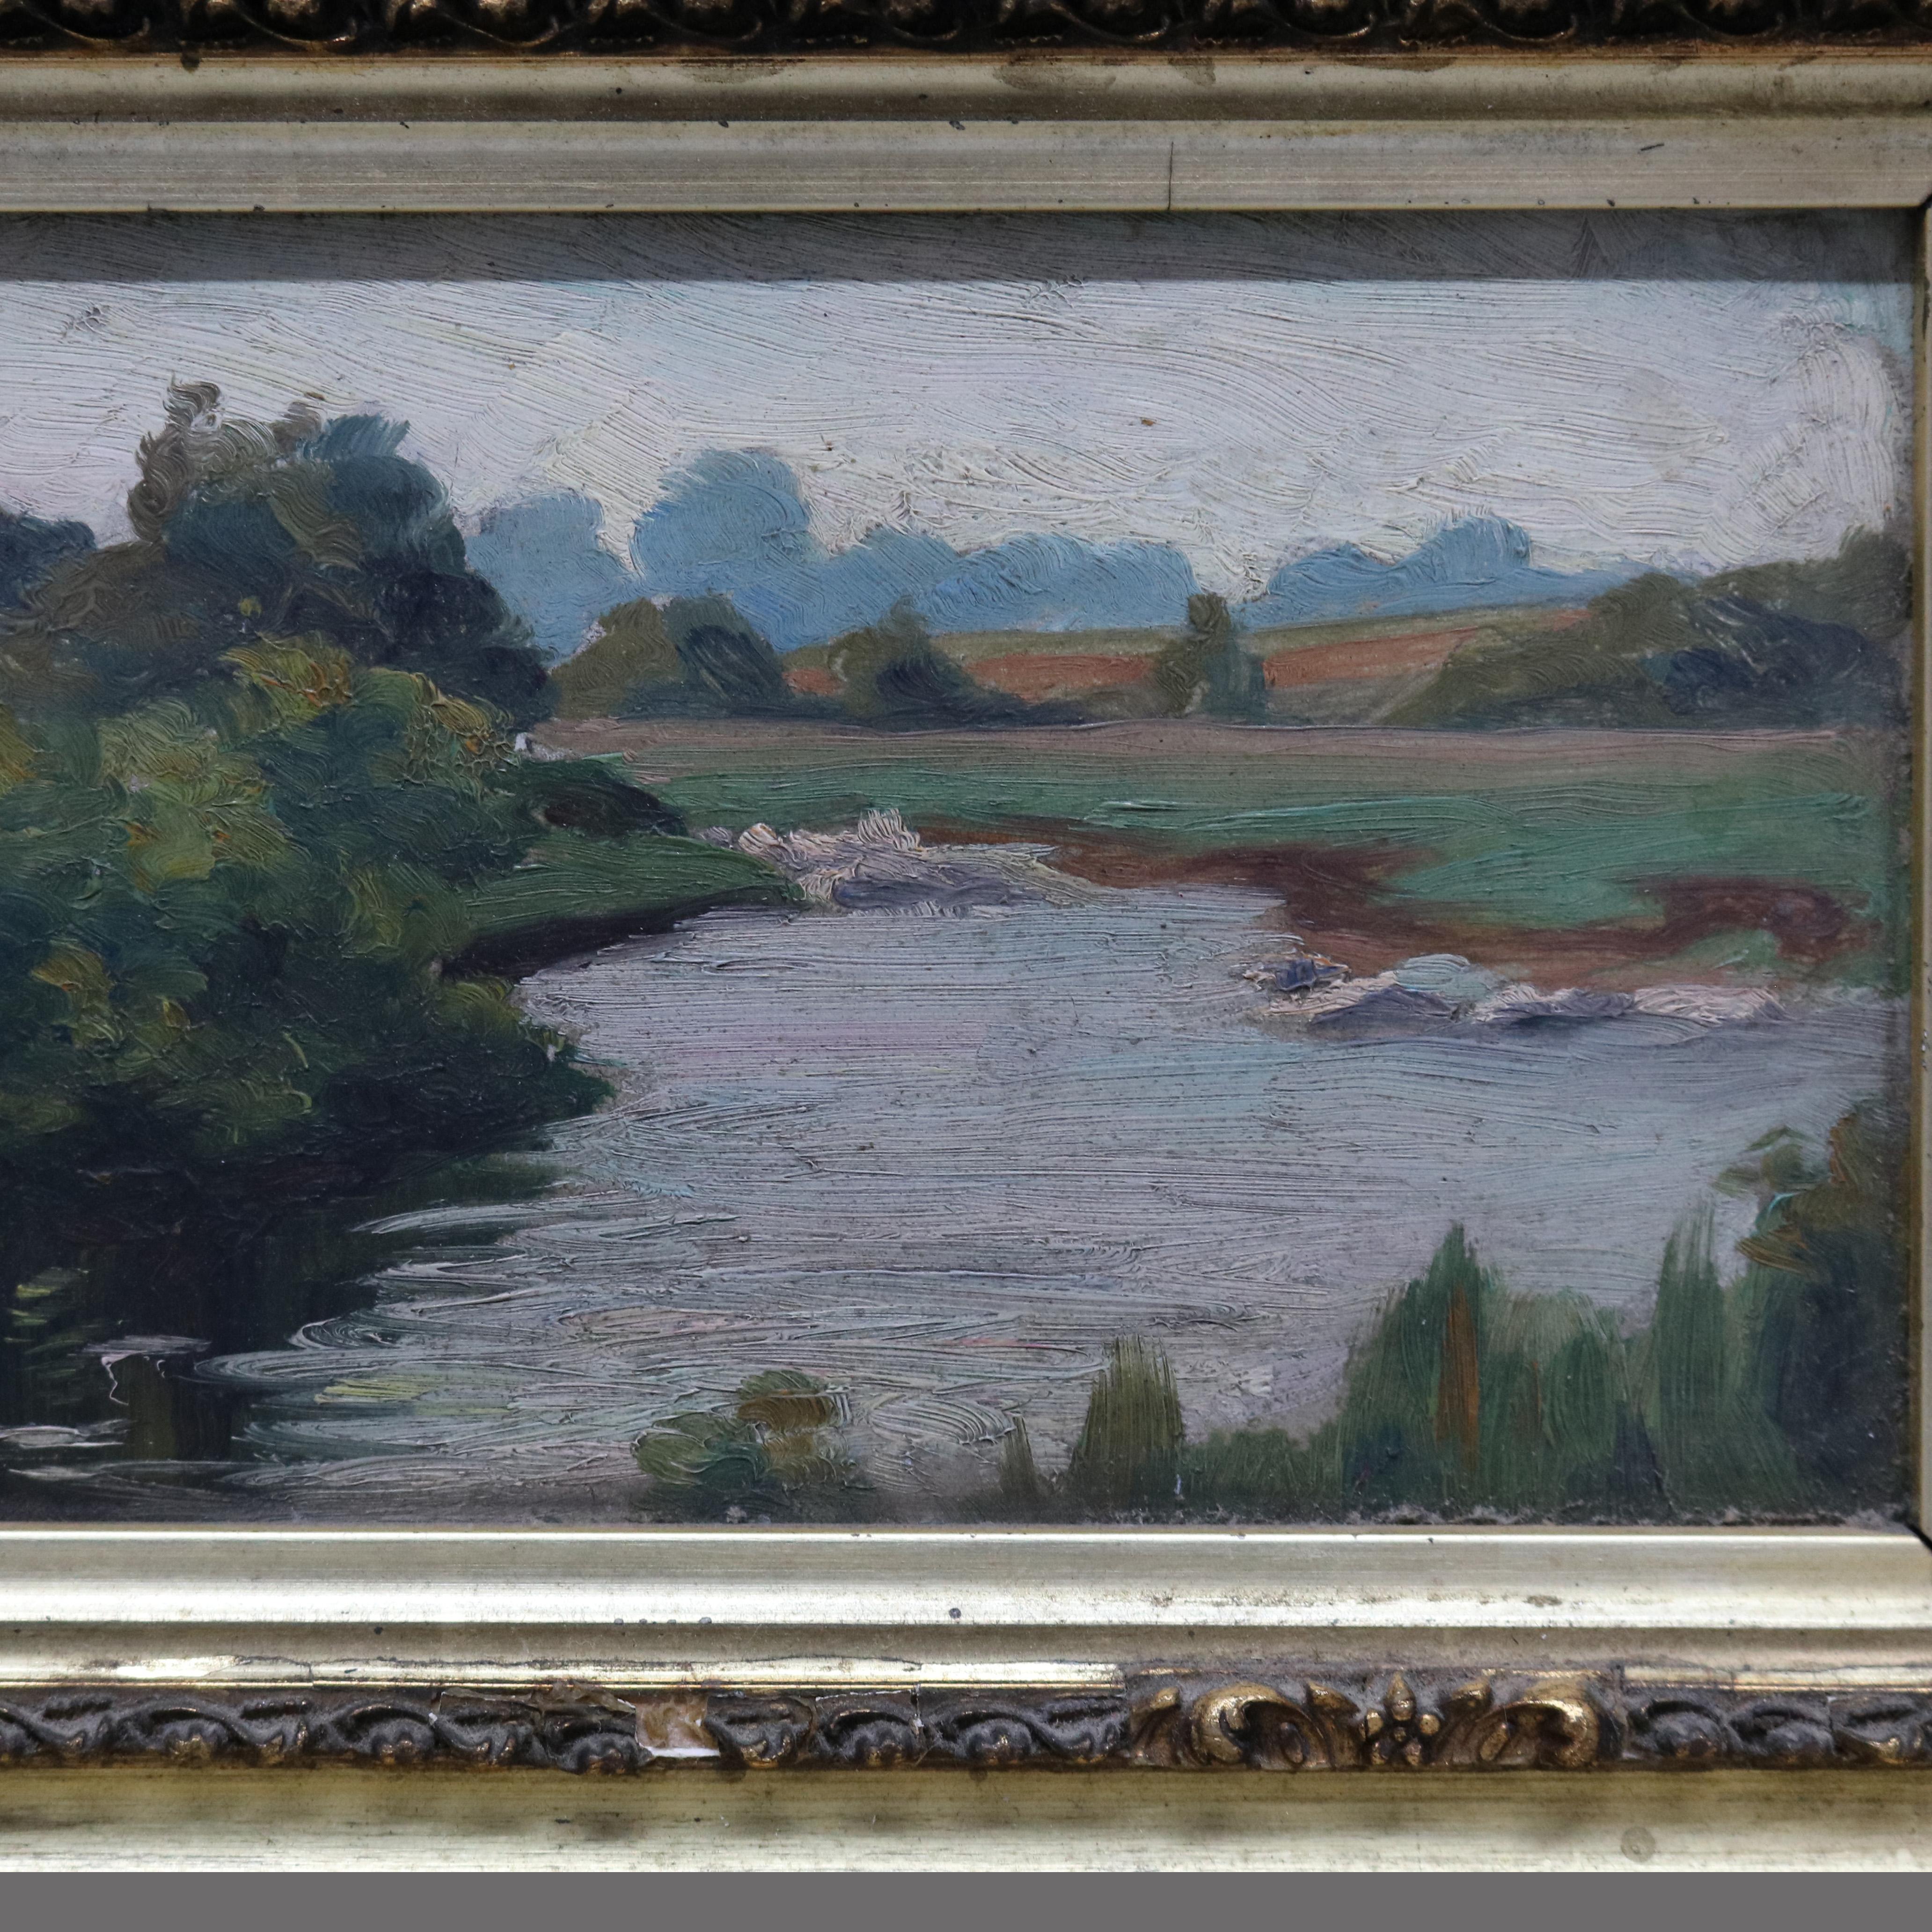 An antique painting offers oil on board landscape scene with stream and meadow, seated in giltwood frame, 19th century.

Measures: 9